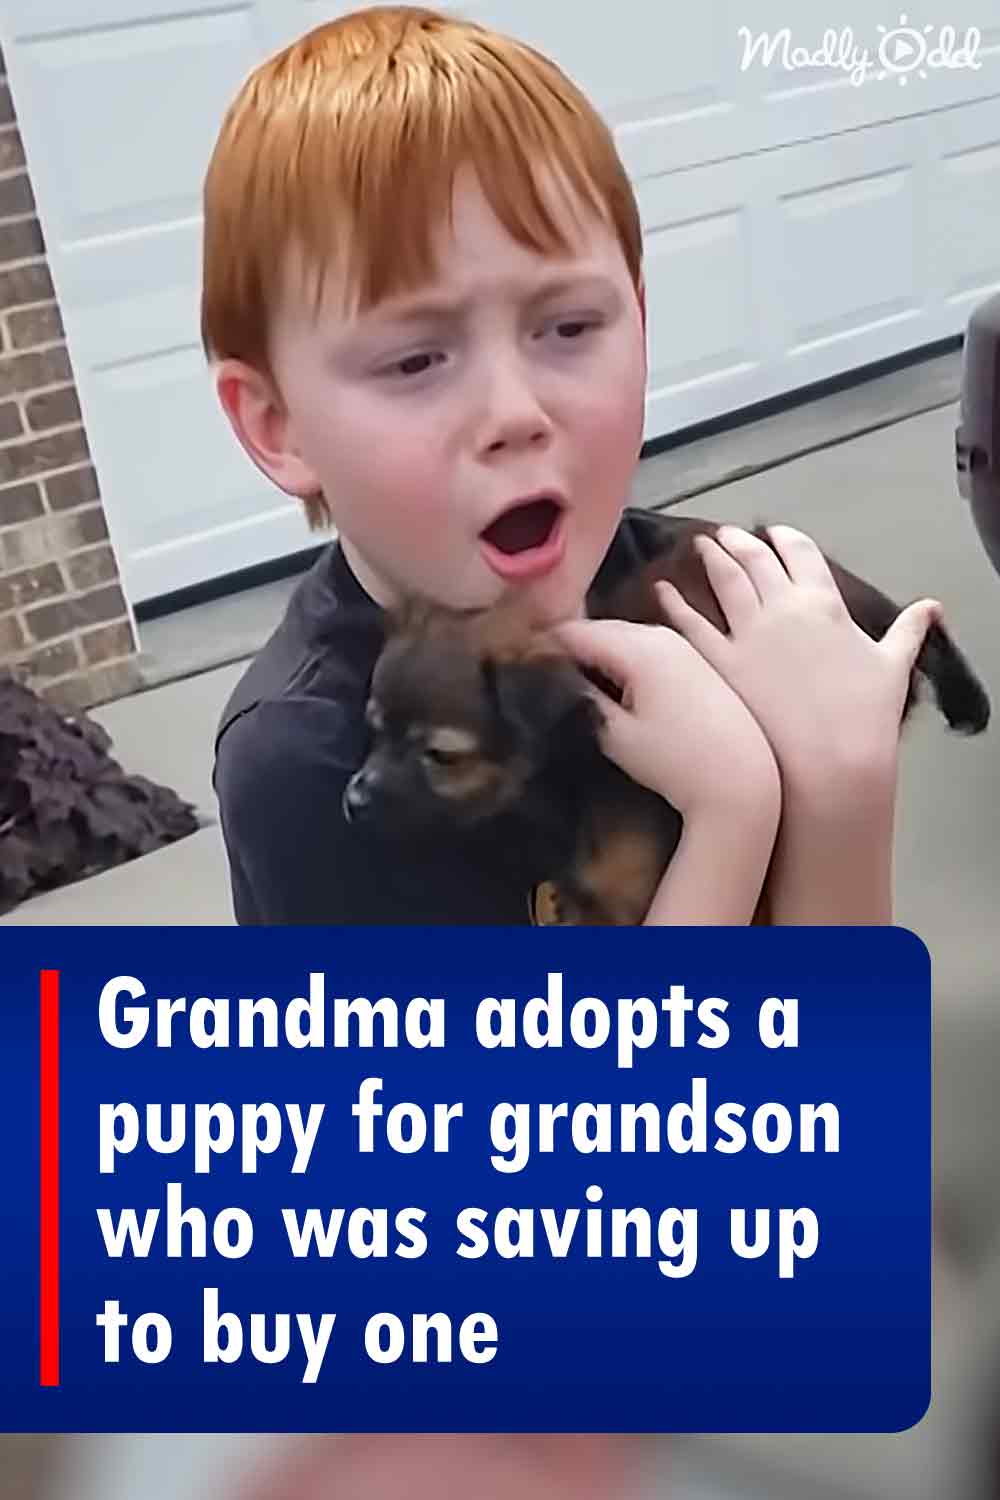 Grandma adopts a puppy for grandson who was saving up to buy one